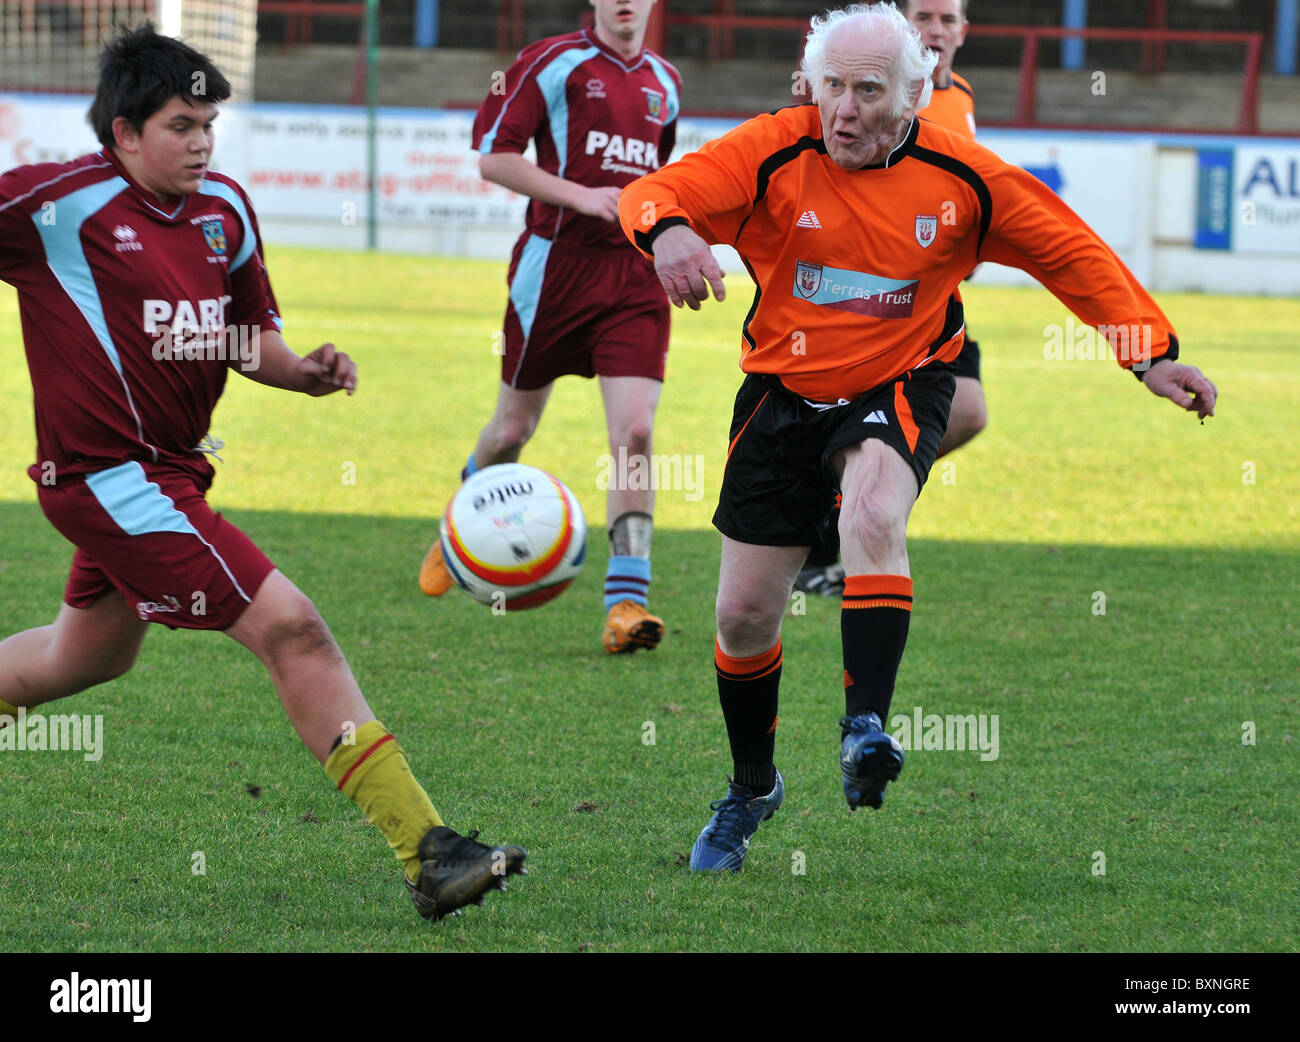 75 year old Dickie Borthwick who still plays competitive football, Dorset, UK Stock Photo